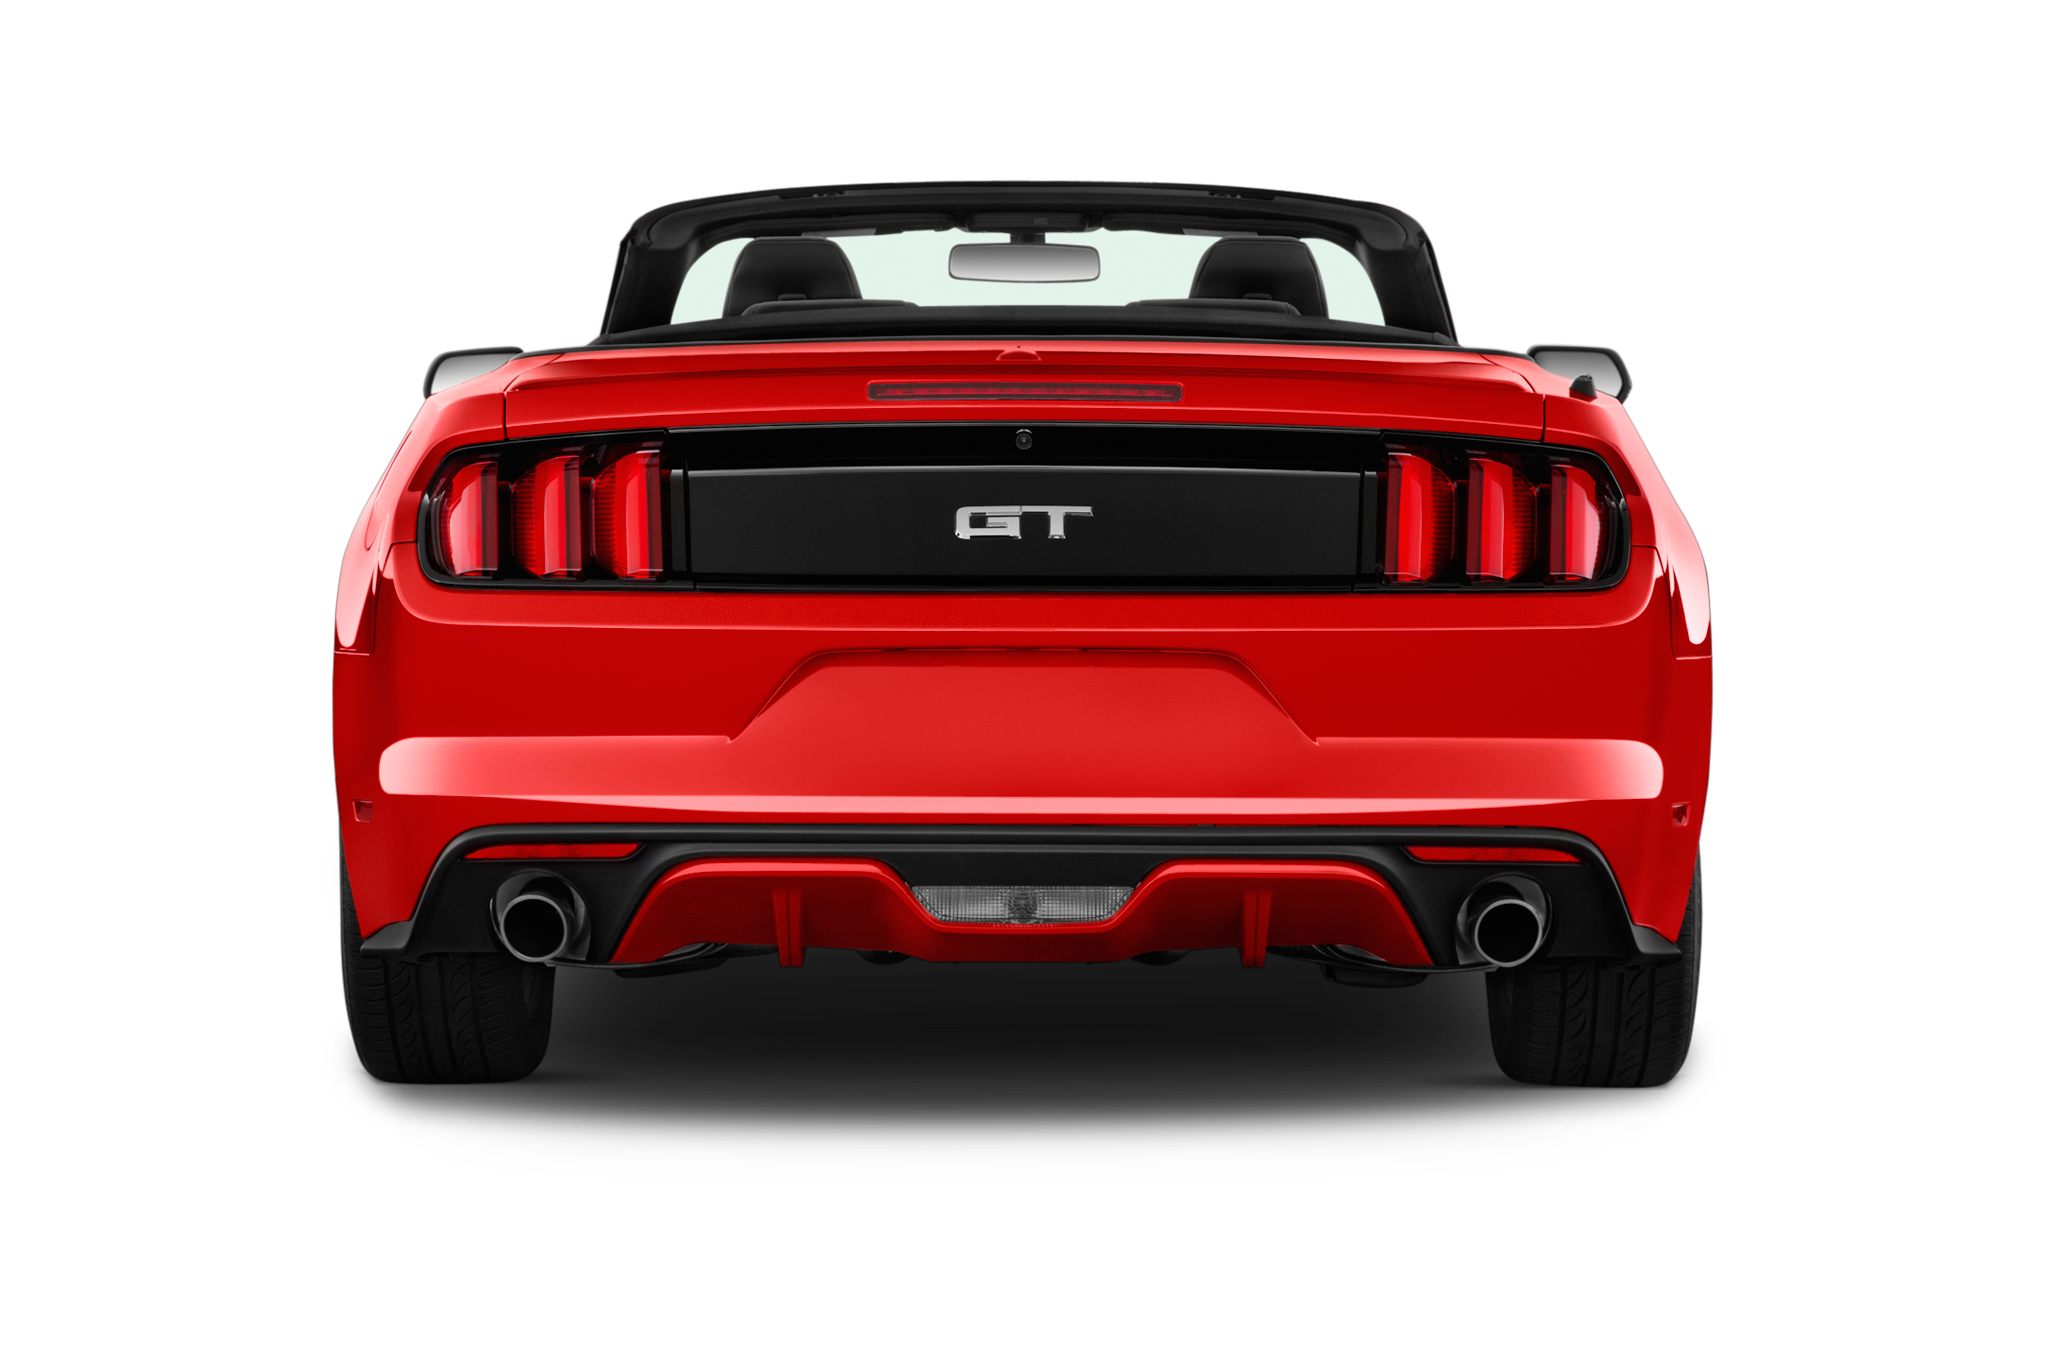 clipart cars 2015 mustang